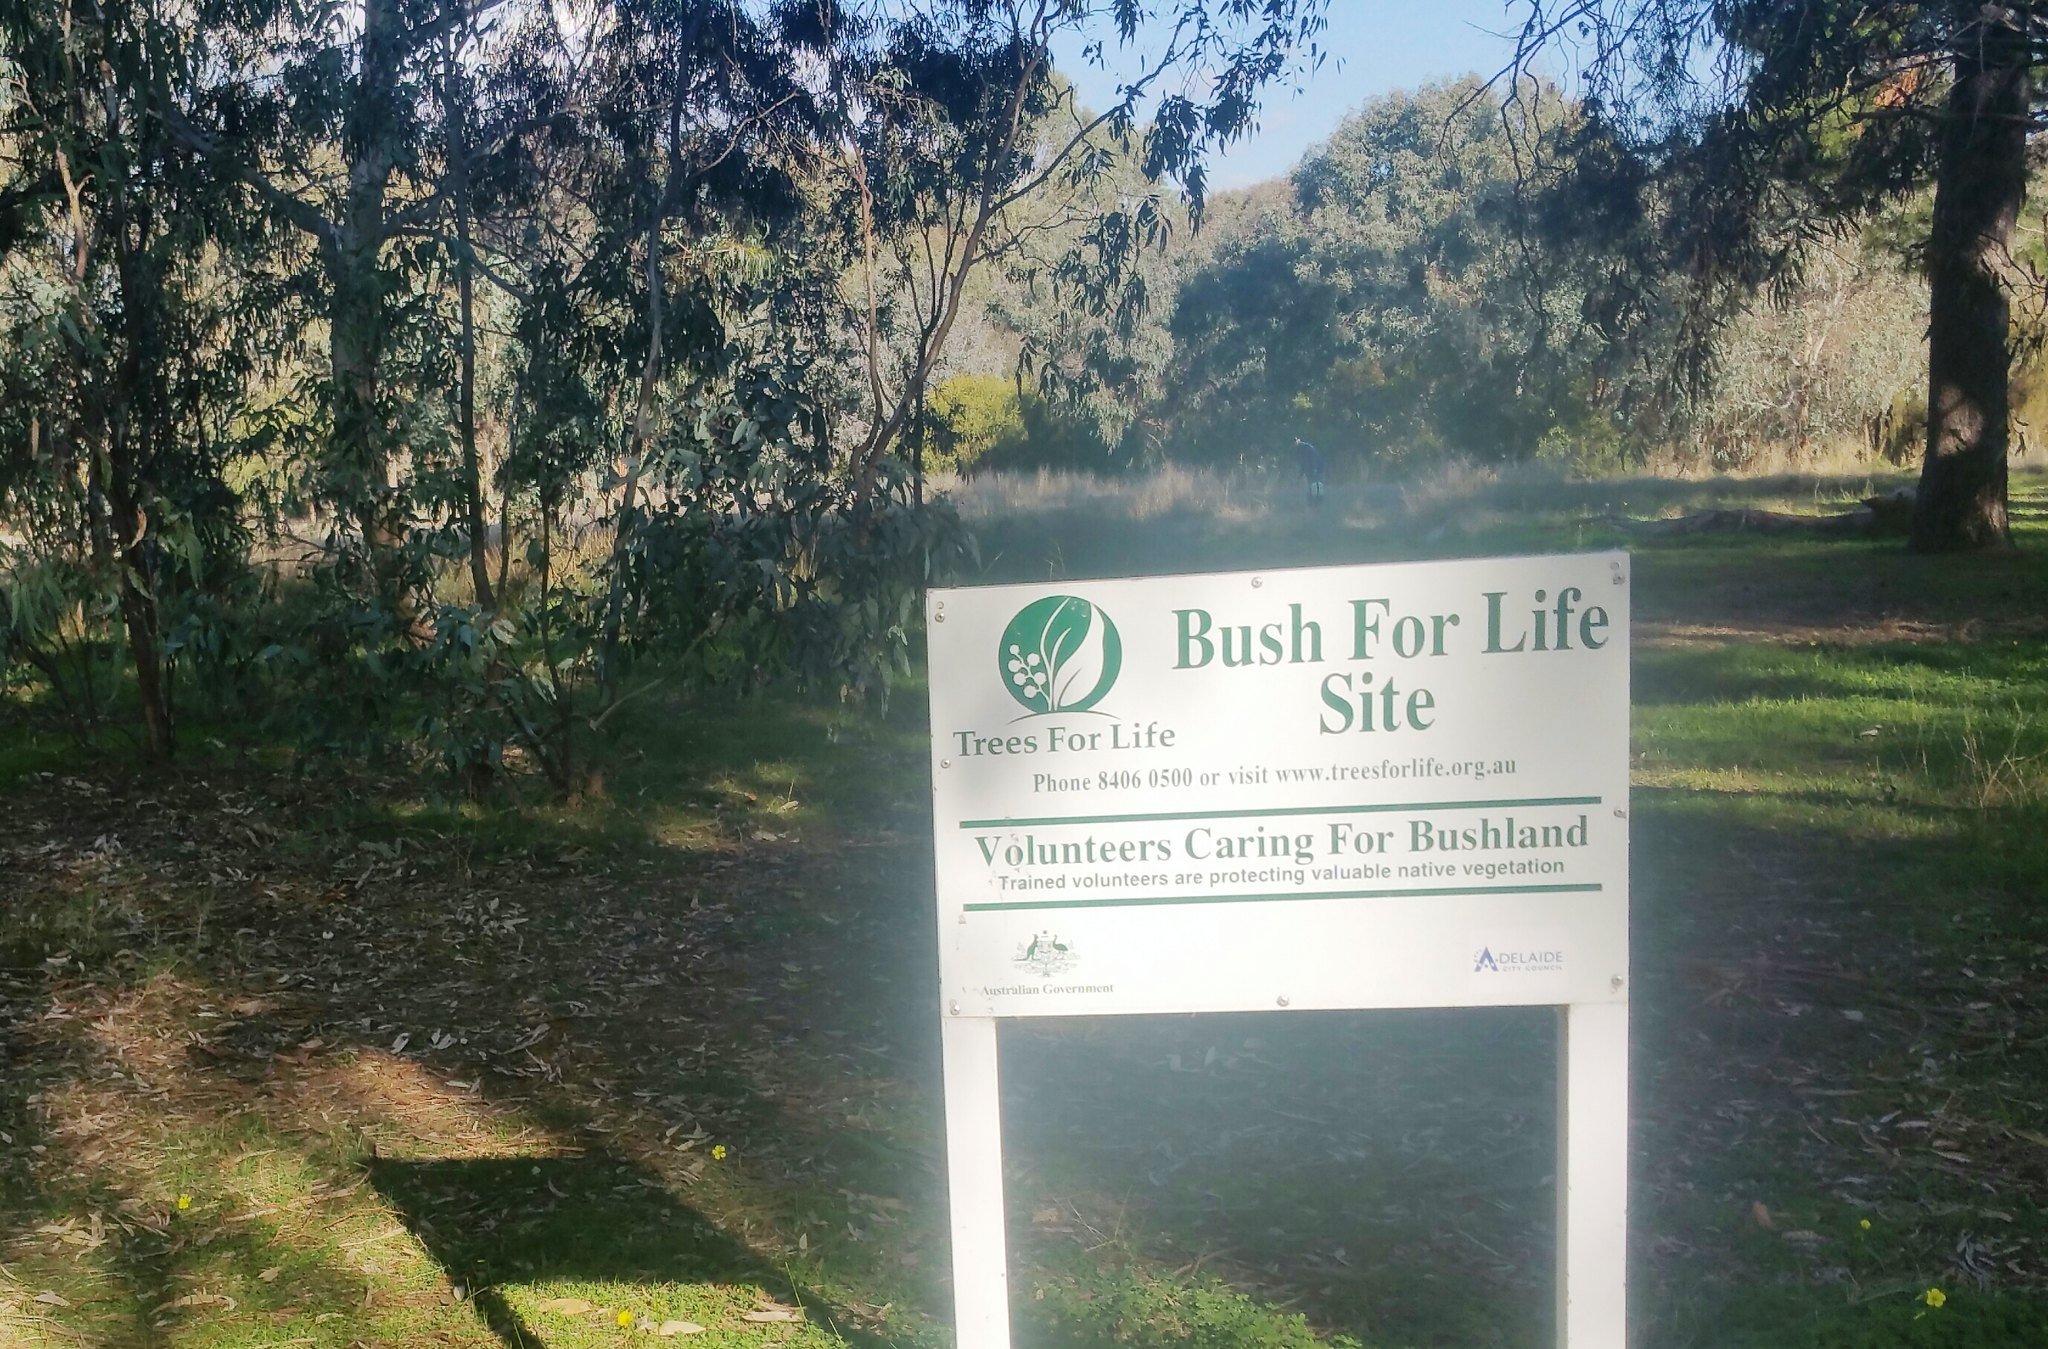 One of the 15 stops during this Sunday's Guided Walk through Carriageway Park / Tuthangga (Park 17 of your #adelaideparklands) is this Bush for Life regeneration site. Hear how it's been restored with native grassland. To book, see the link in our In